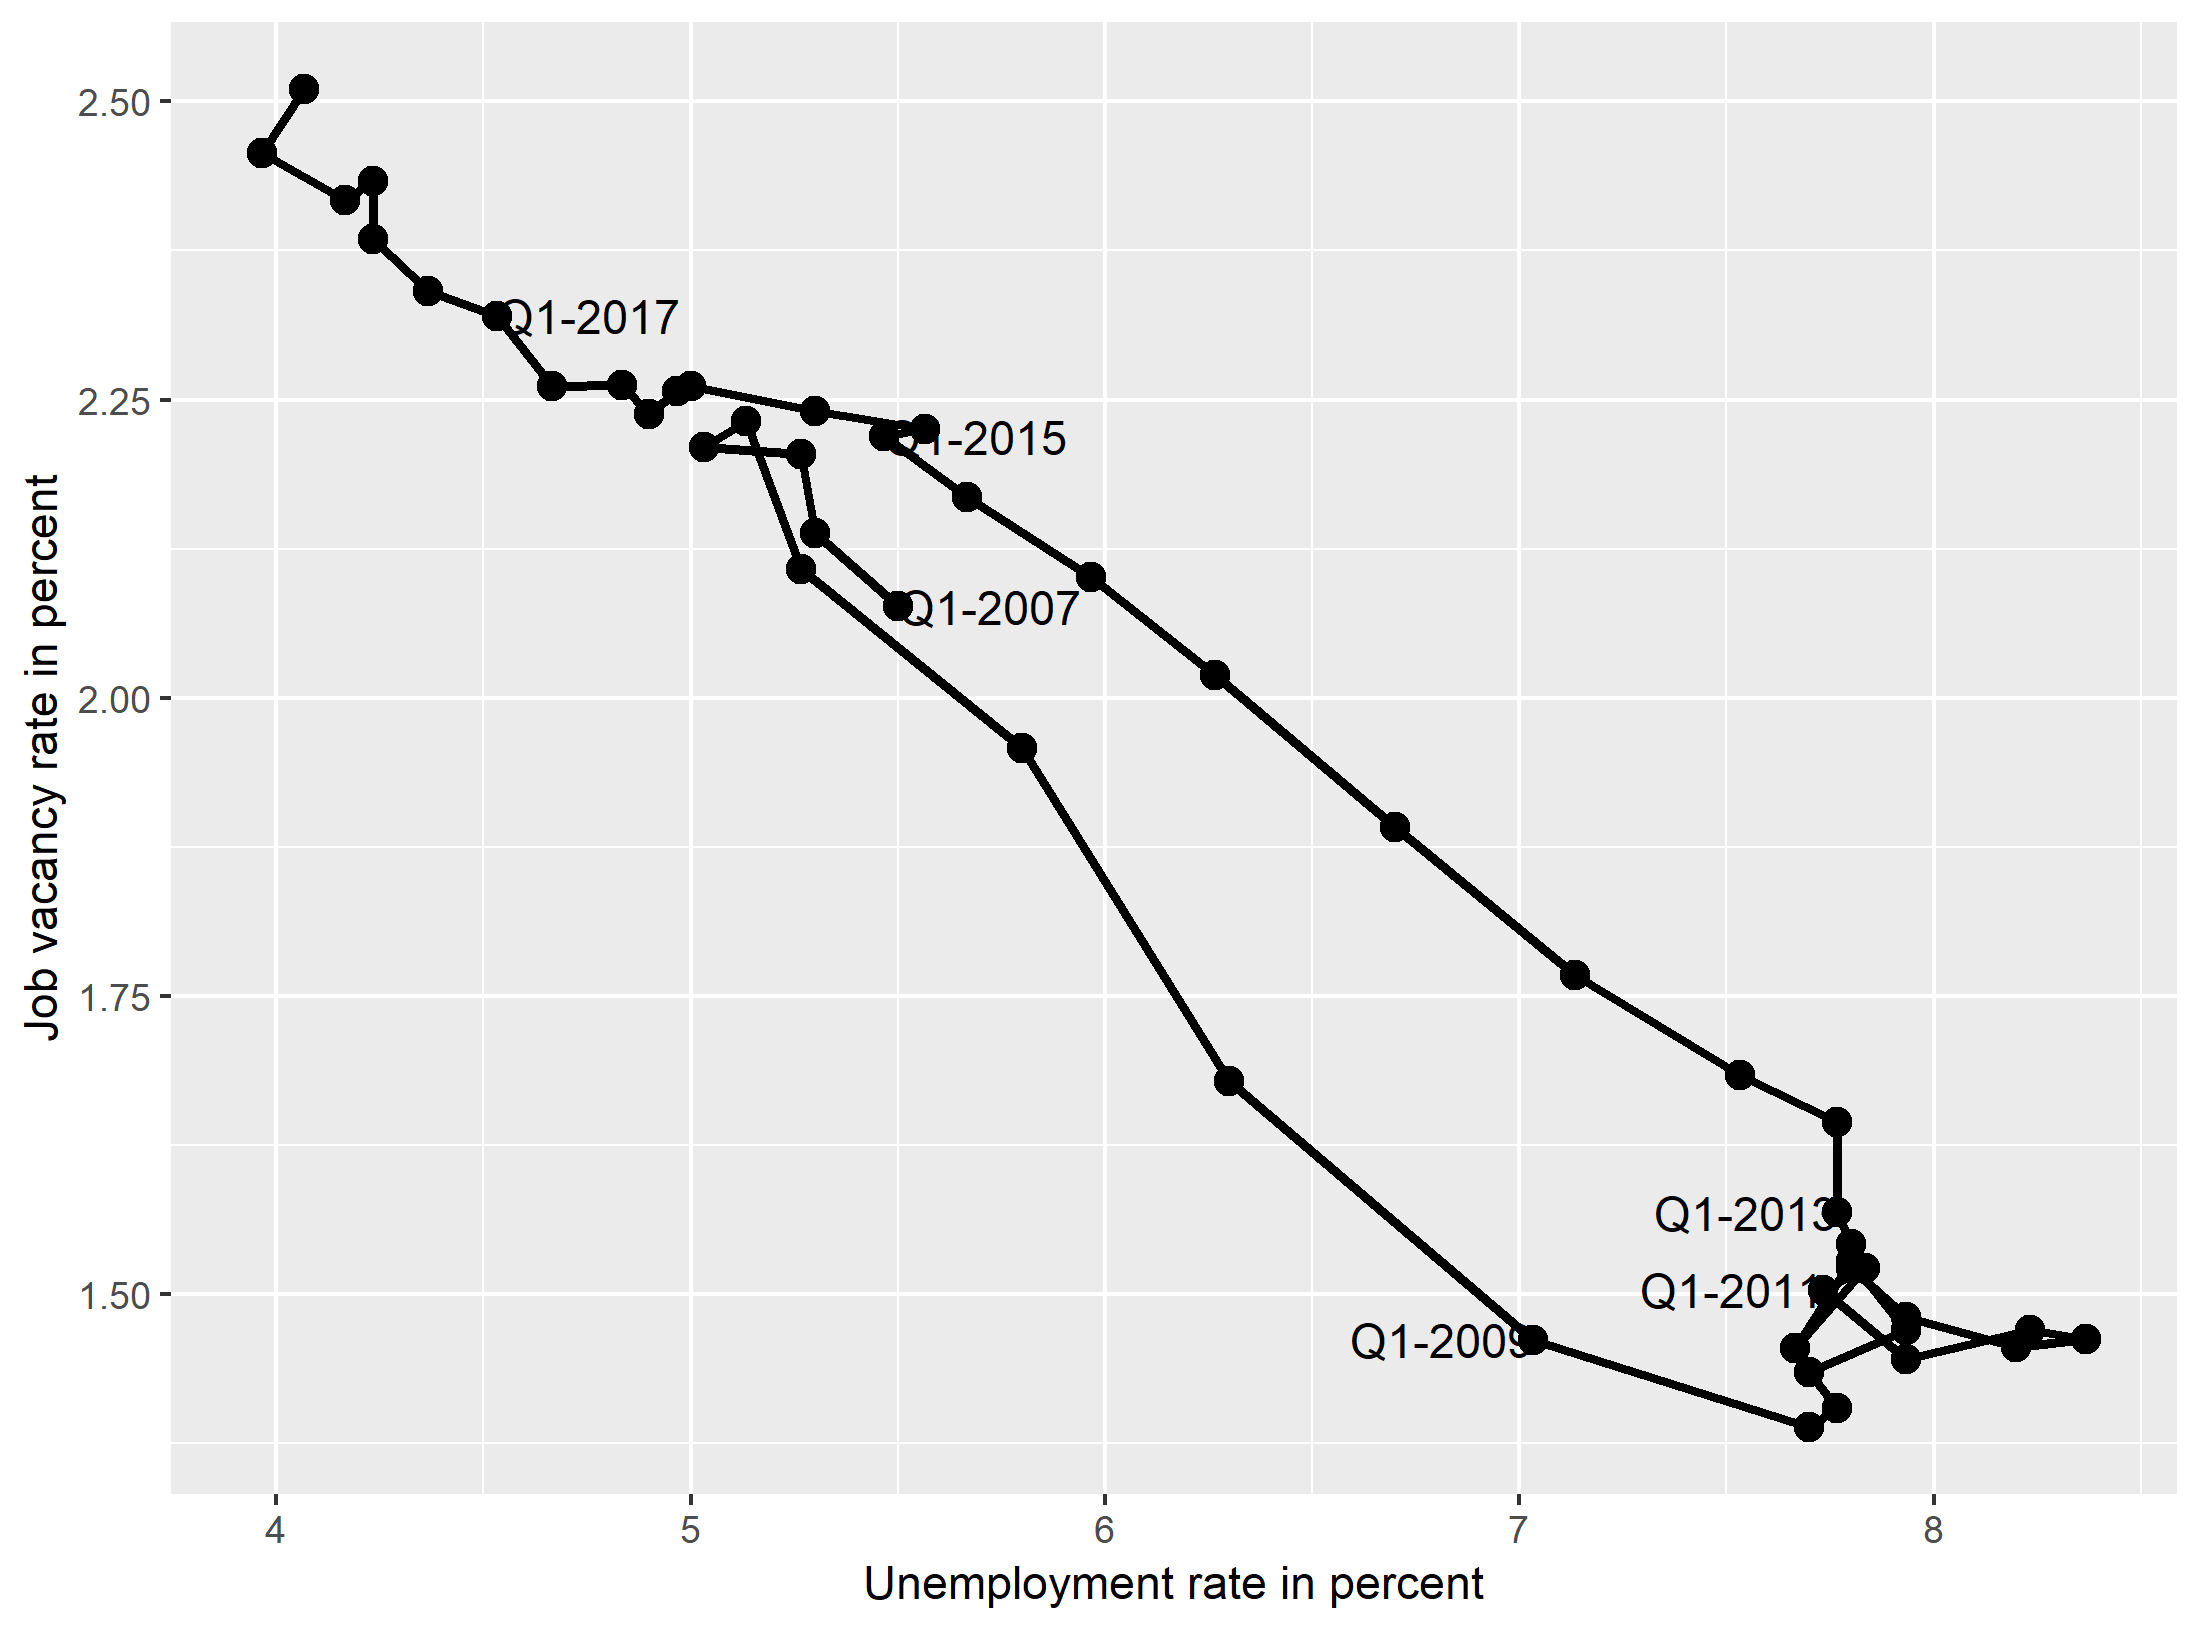 The Beveridge curve for the United Kingdom. Data source: OECD. 